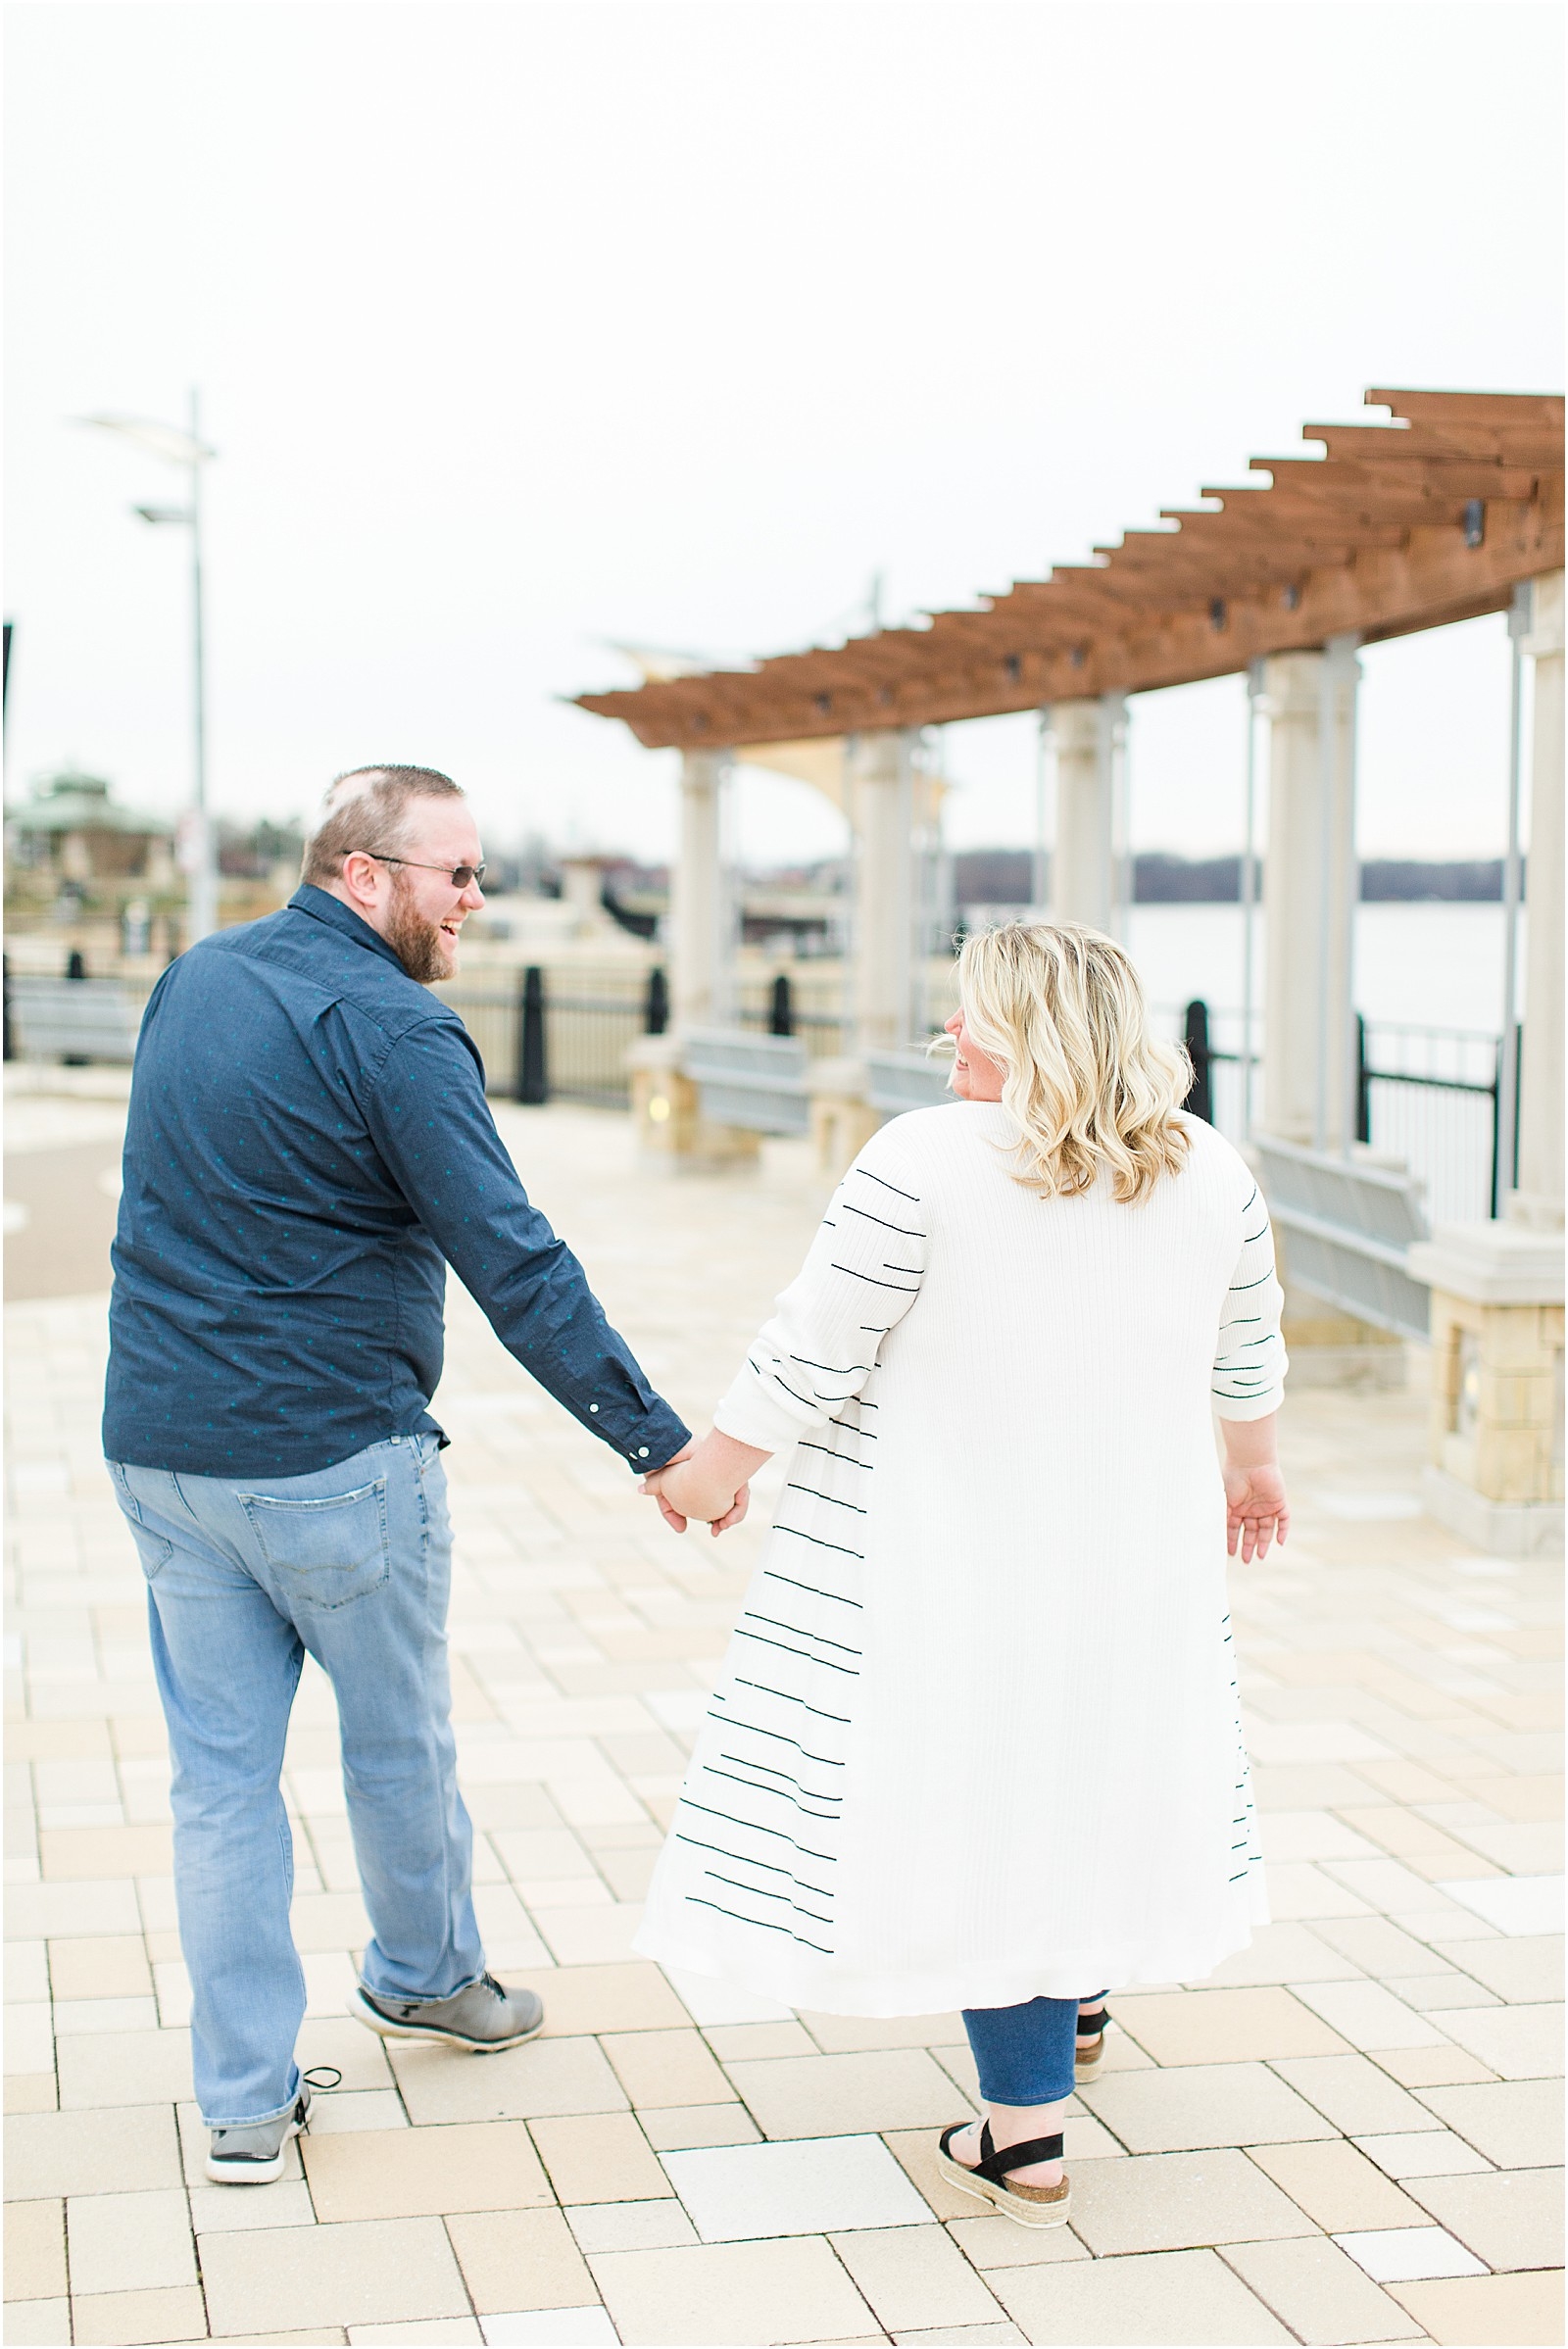 A Downtown Owensboro Engagement Session | Brittany and Neil | Engaged | | 0006.jpg